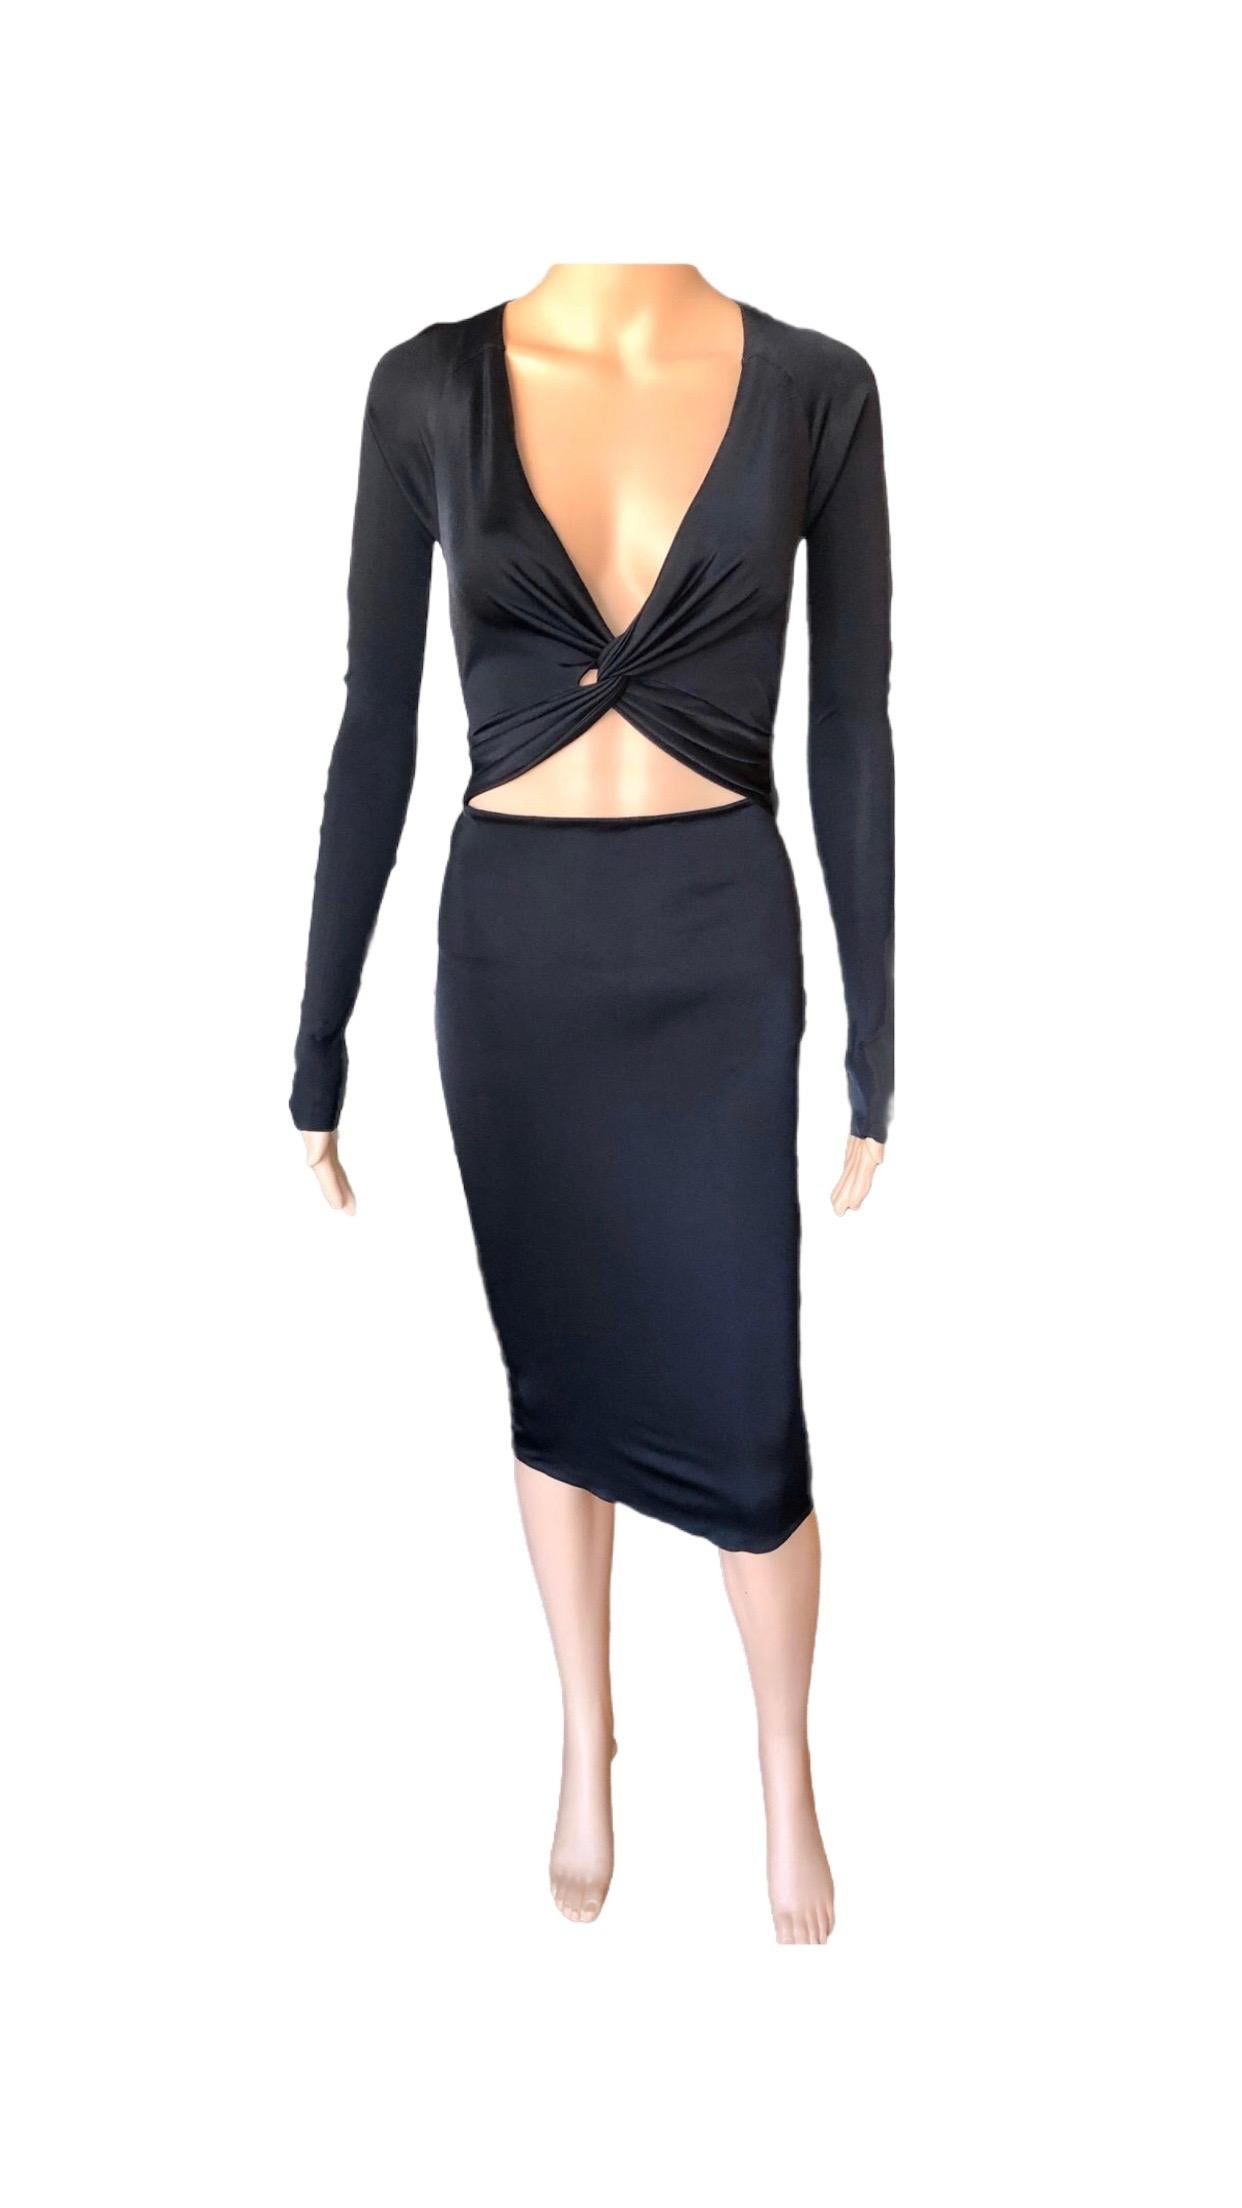 Gucci S/S 2005 Tom Ford Plunging Cutout Backless Bodycon Black Dress en vente 8